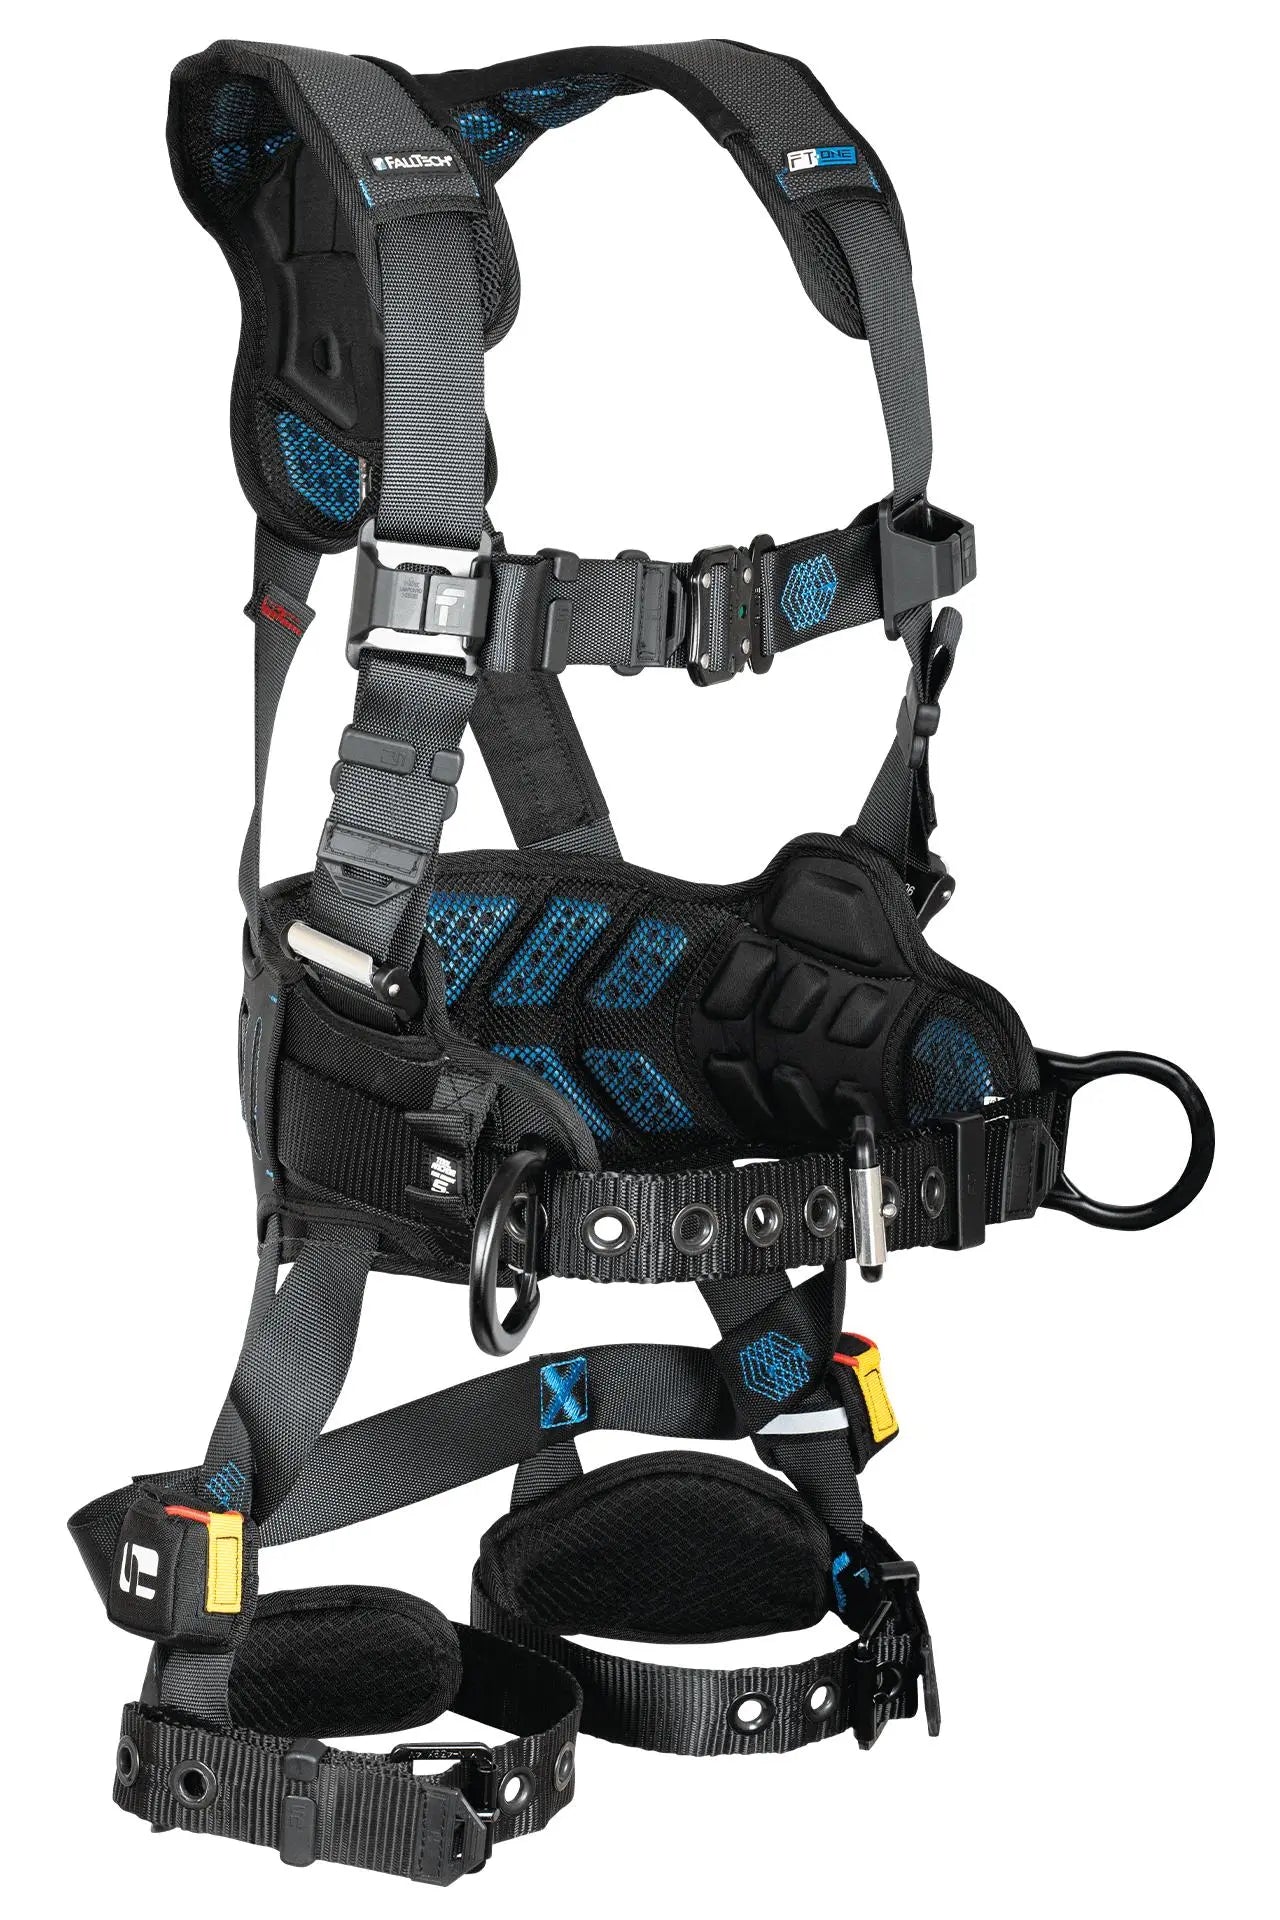 FallTech - FT-One‚ 3D Construction Belted Full Body Harness, Tongue Buckle Leg Adjustments